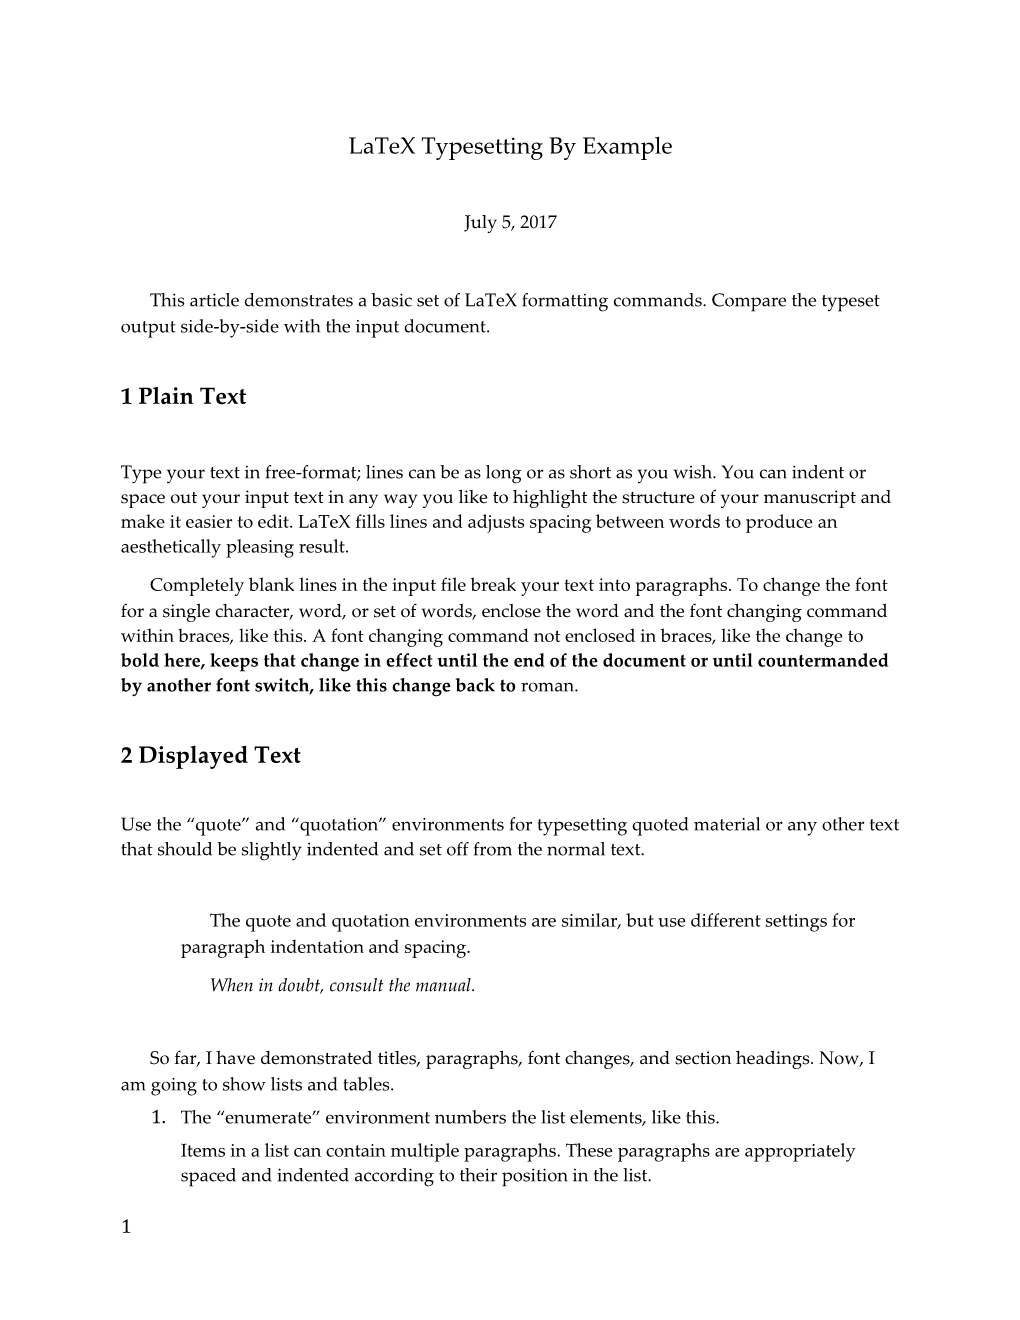 Latex Typesetting by Example